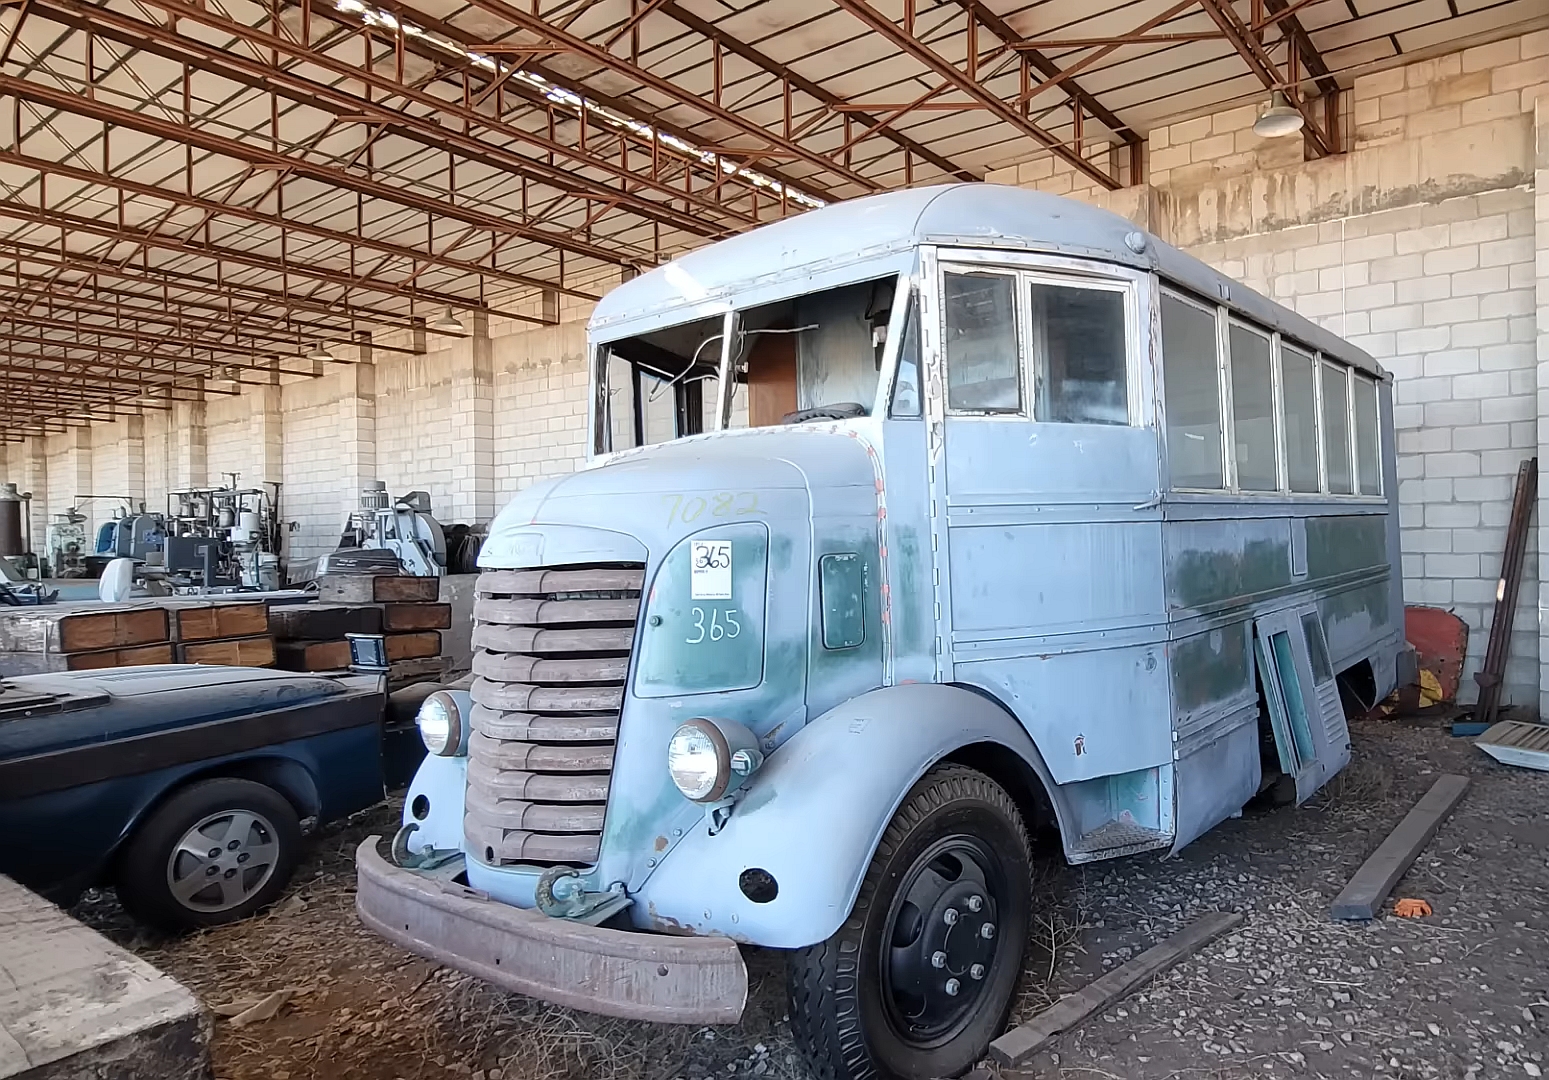 This 1940 GMC Motorhome Built for Jane Russell Is an Extremely Rare Survivor picture pic